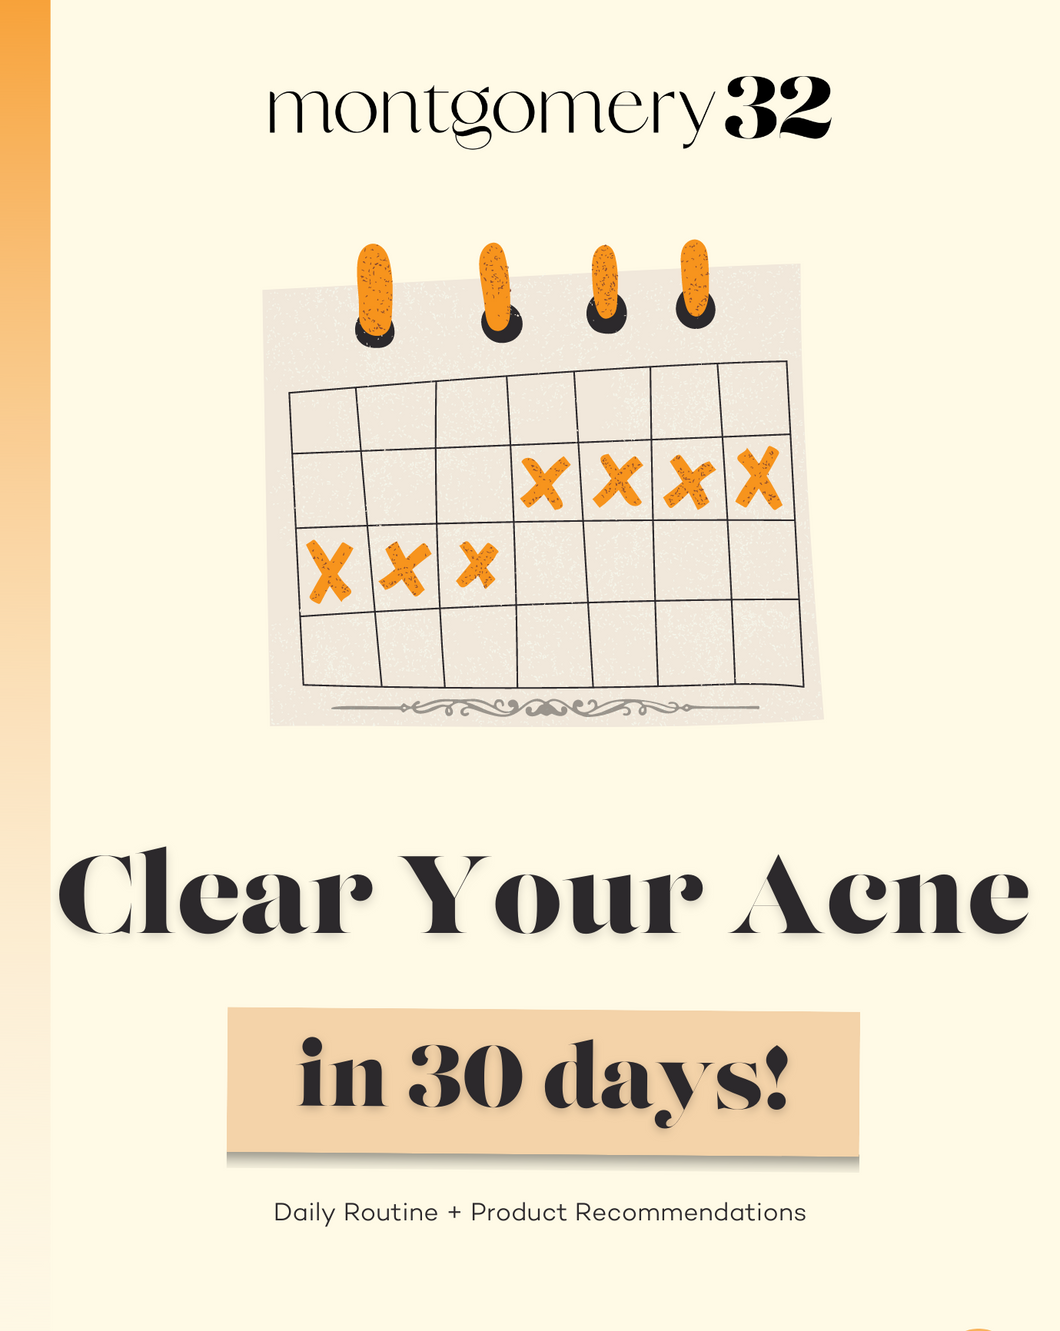 Clear Your Acne in 30 Days